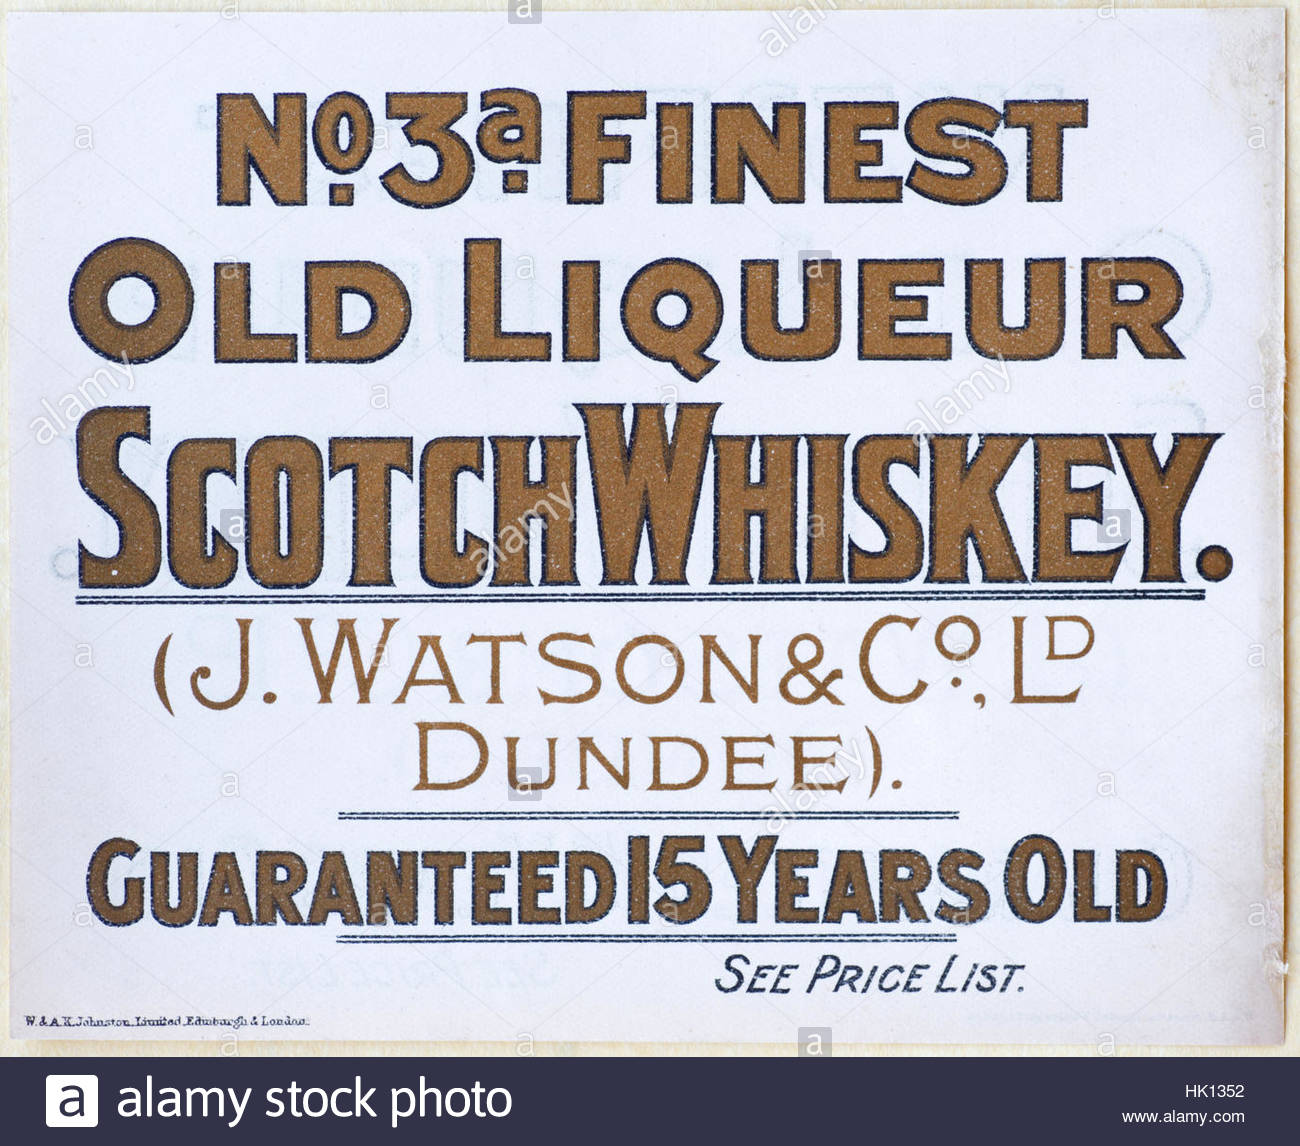 No 3a Finest Old Liqueur Scotch Whisky, original vintage advertising from circa 1900 Stock Photo